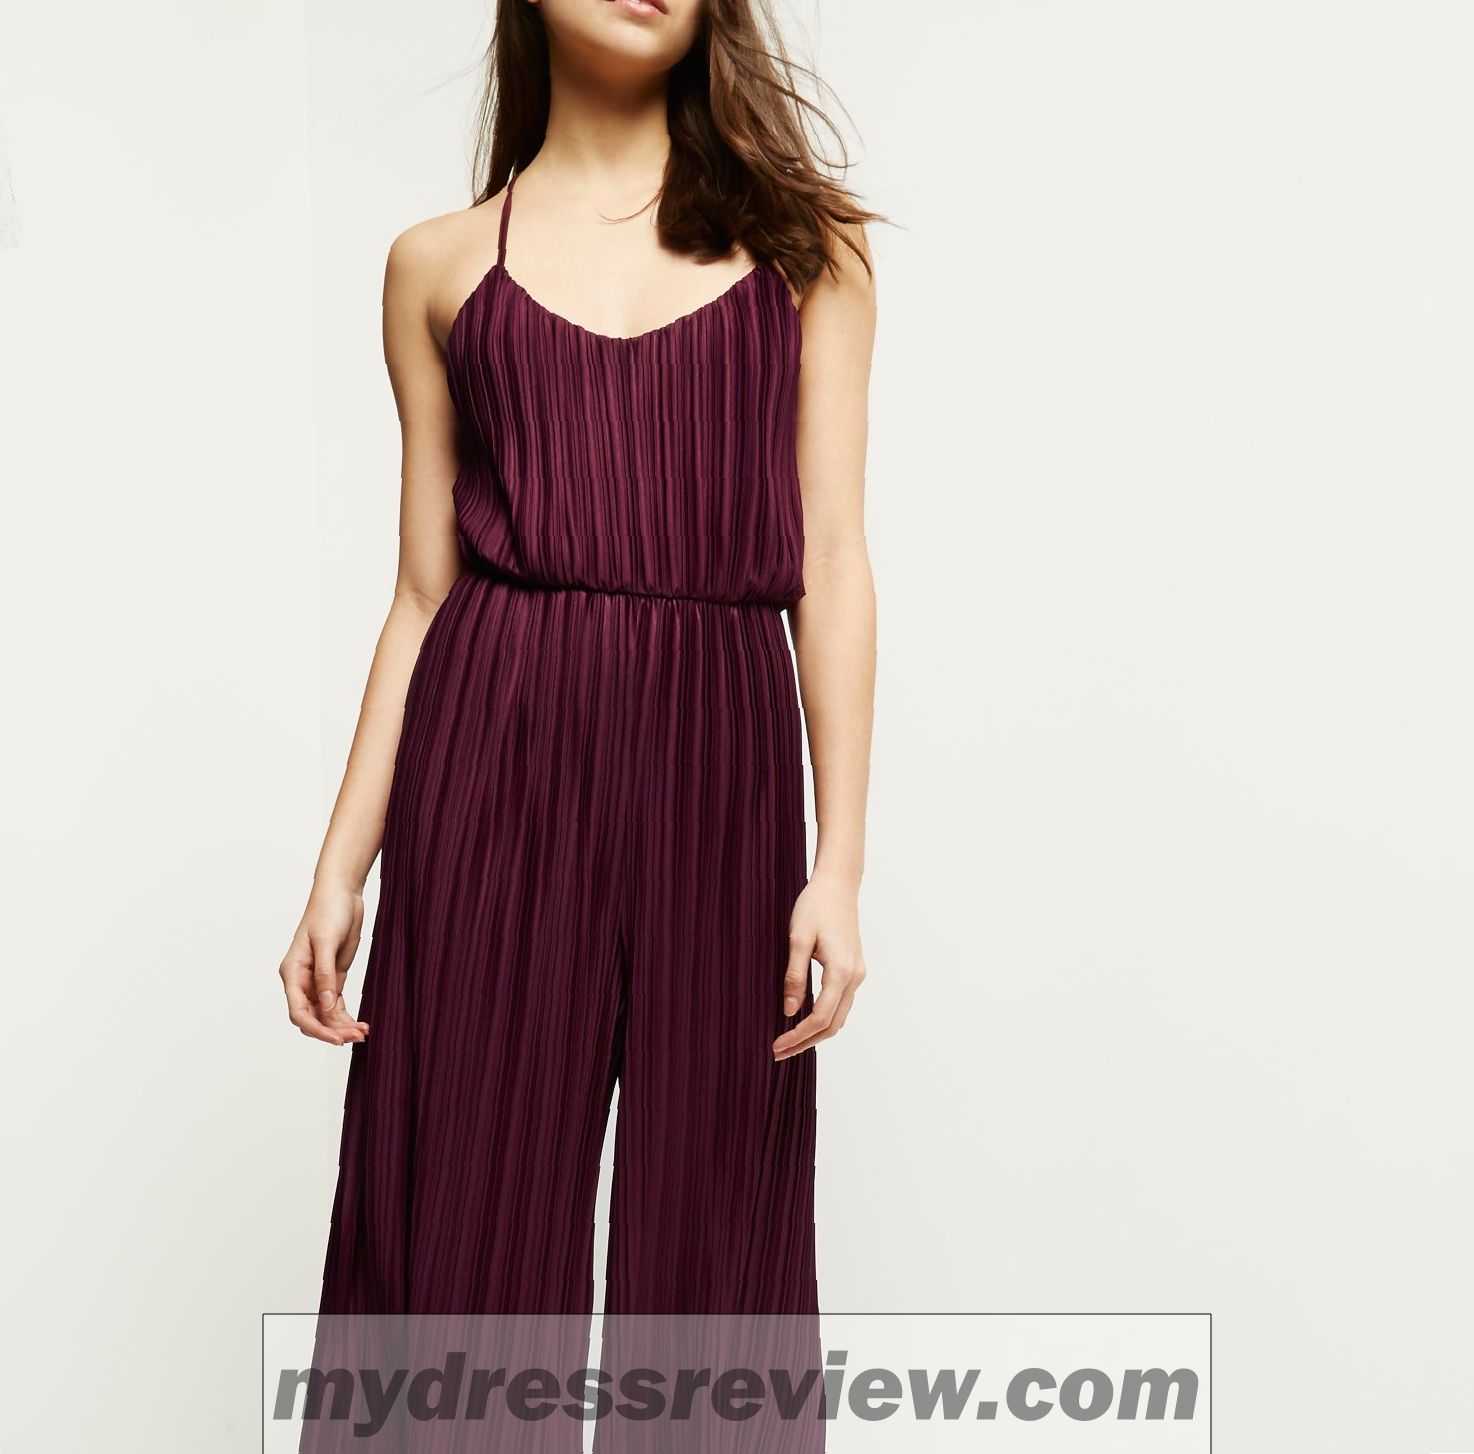 River Island Purple Dress & Where To Find In 2017